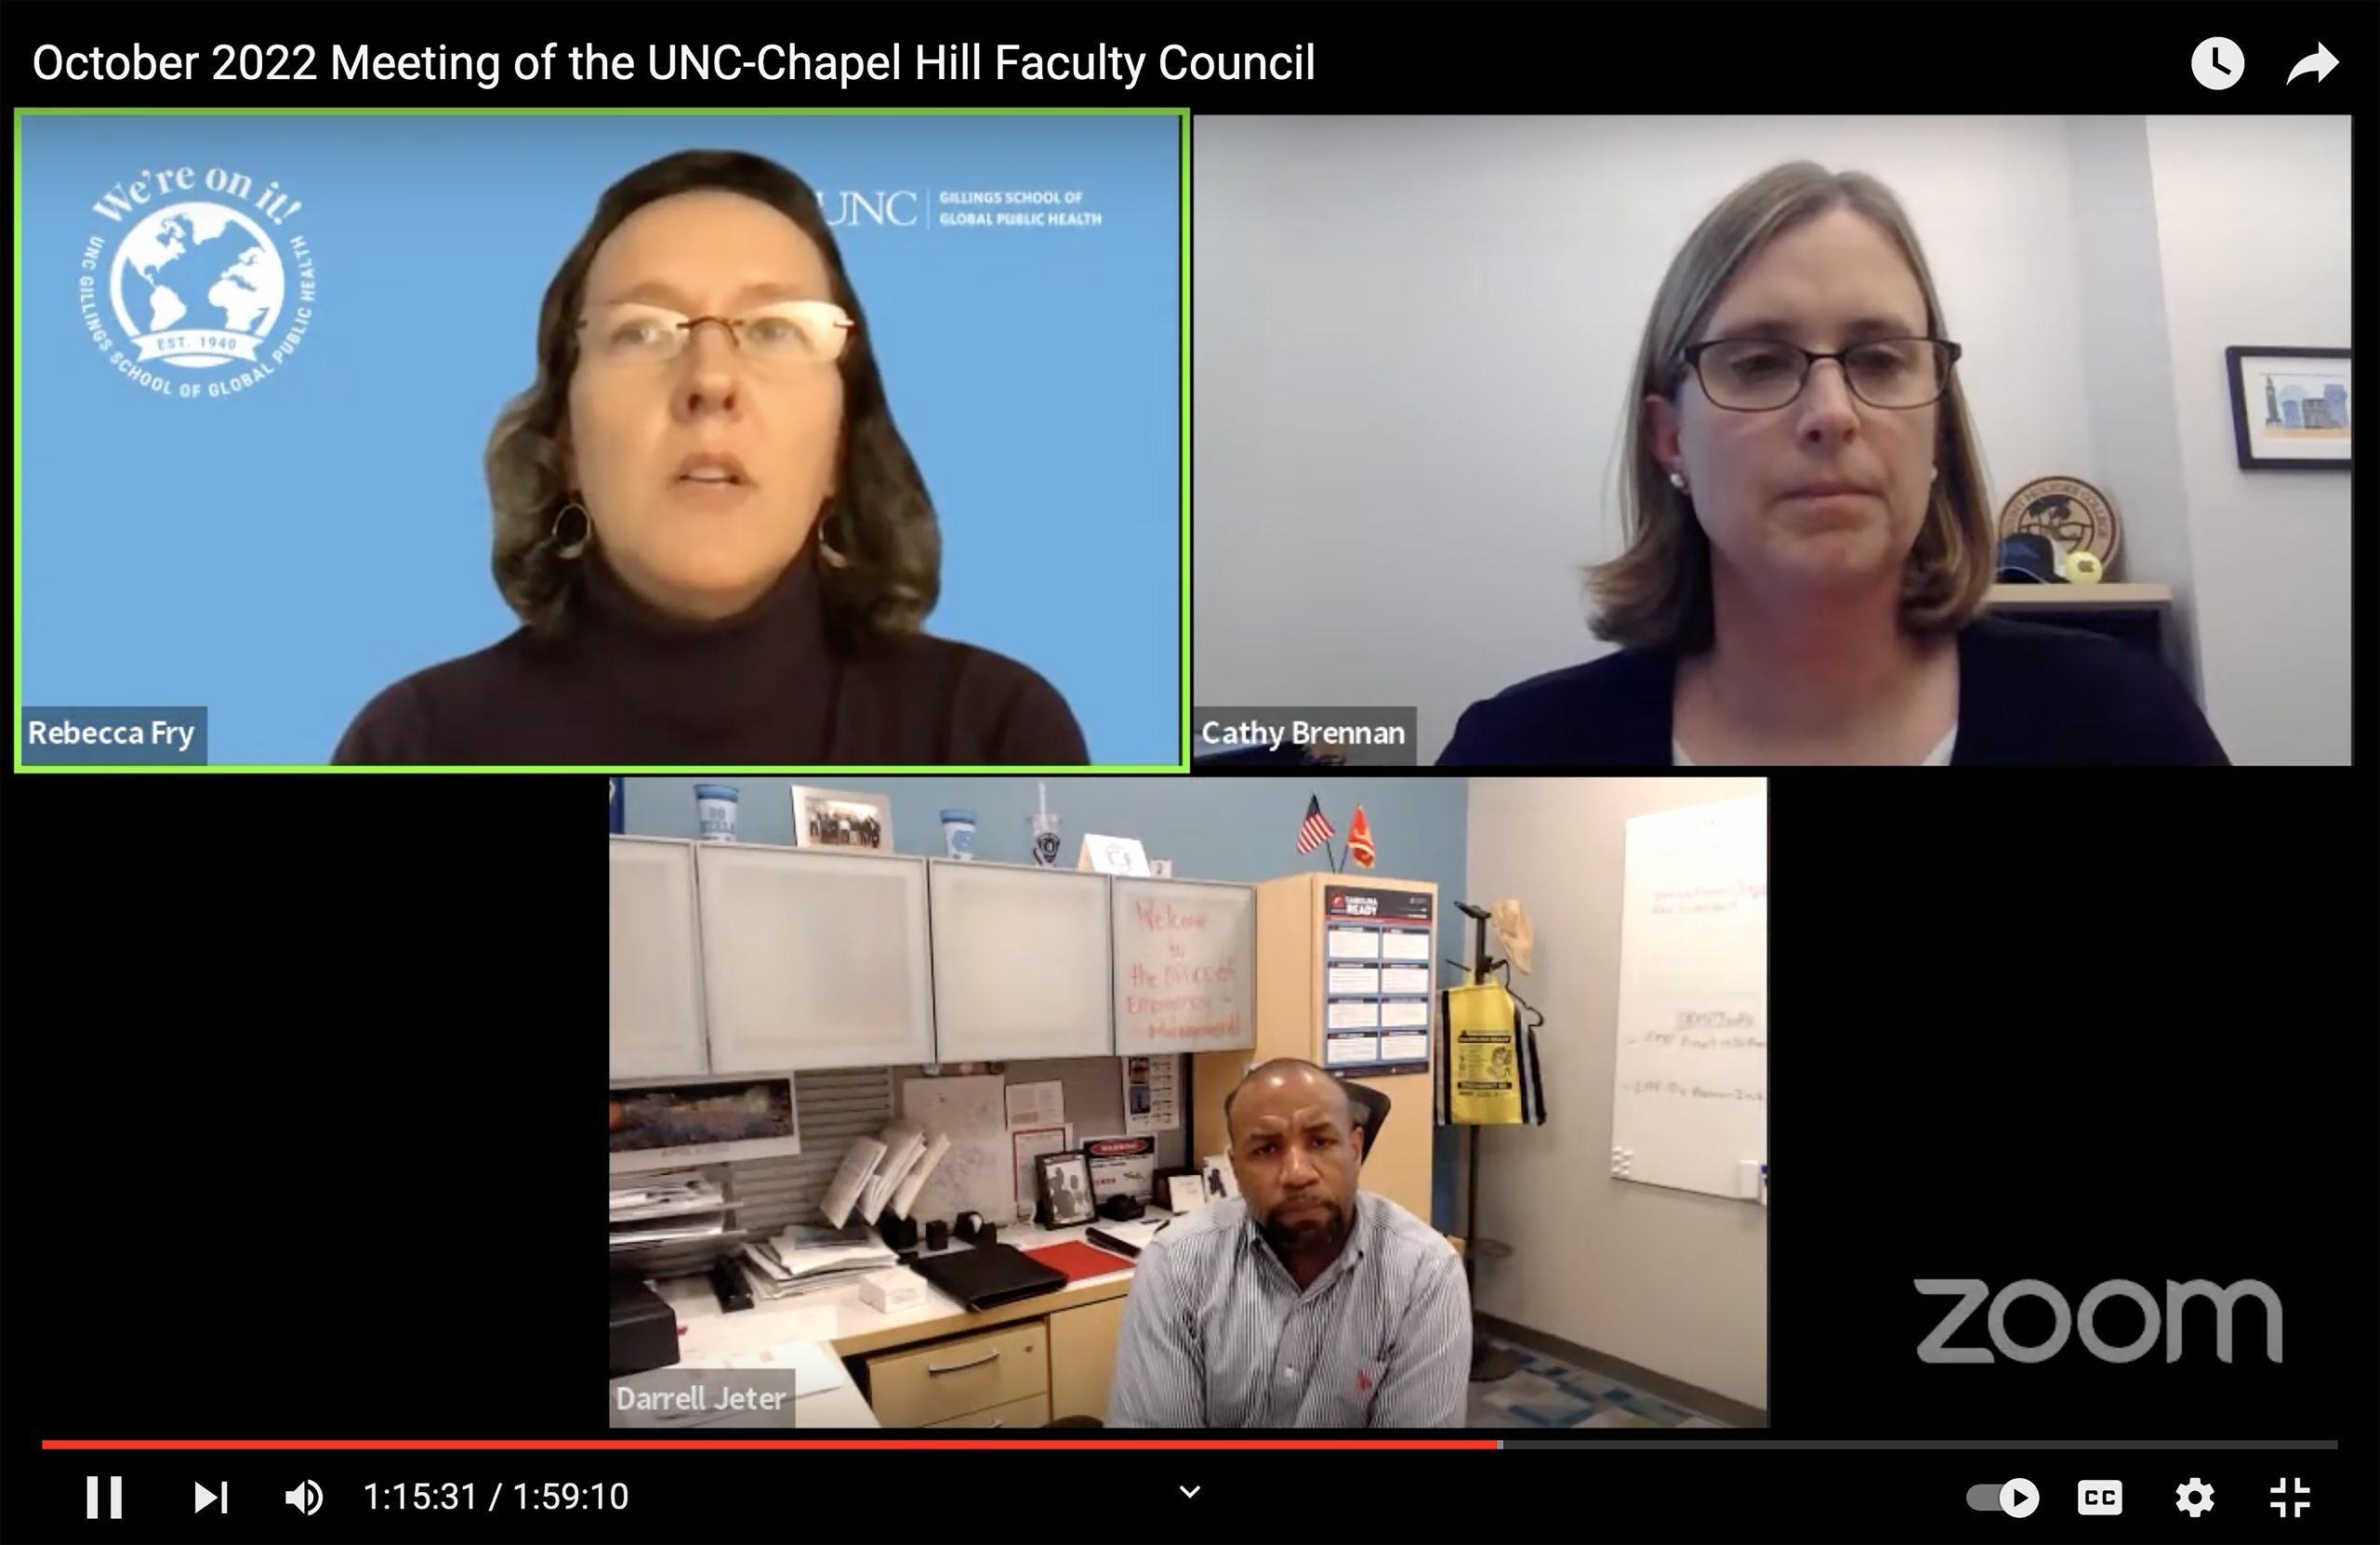 Screengrab of virtual meeting showing Rebecca Fry, Environmental, Health and Safety Executive Director Cathy Brennan and Emergency Management and Planning Director Darrell Jeter discuss what is being done about lead in campus water fixtures.